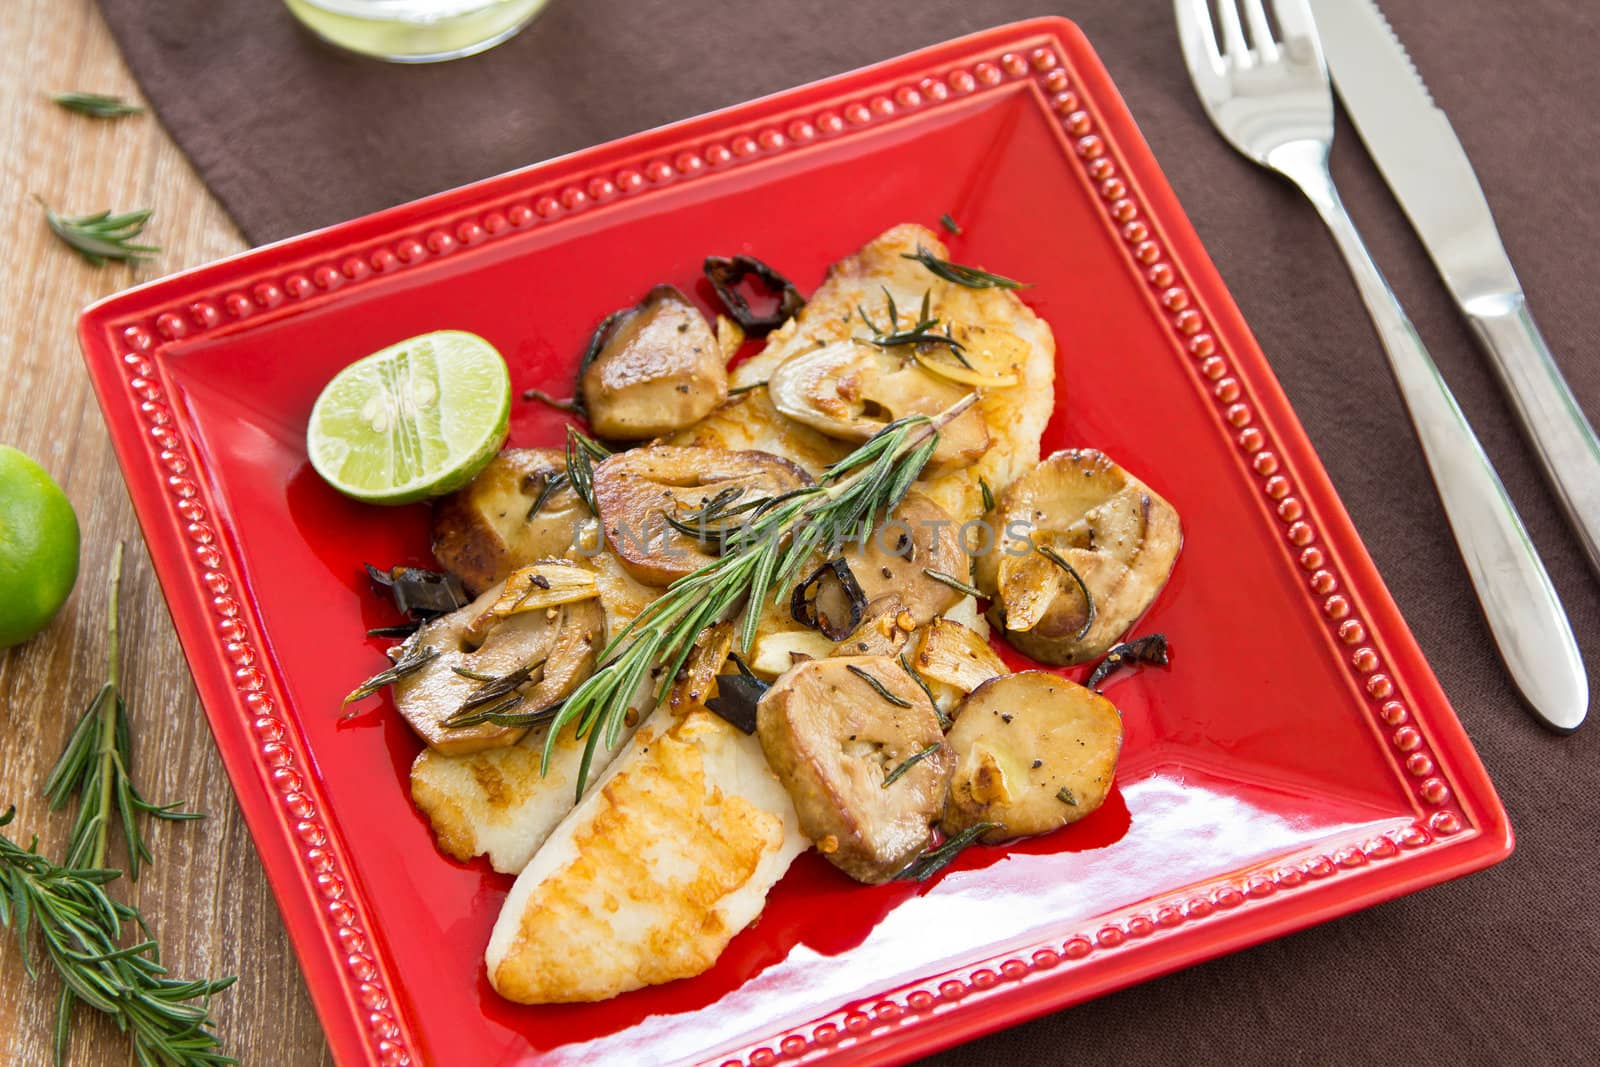 Grilled Dory fish with mushroom sautéed with  rosemary